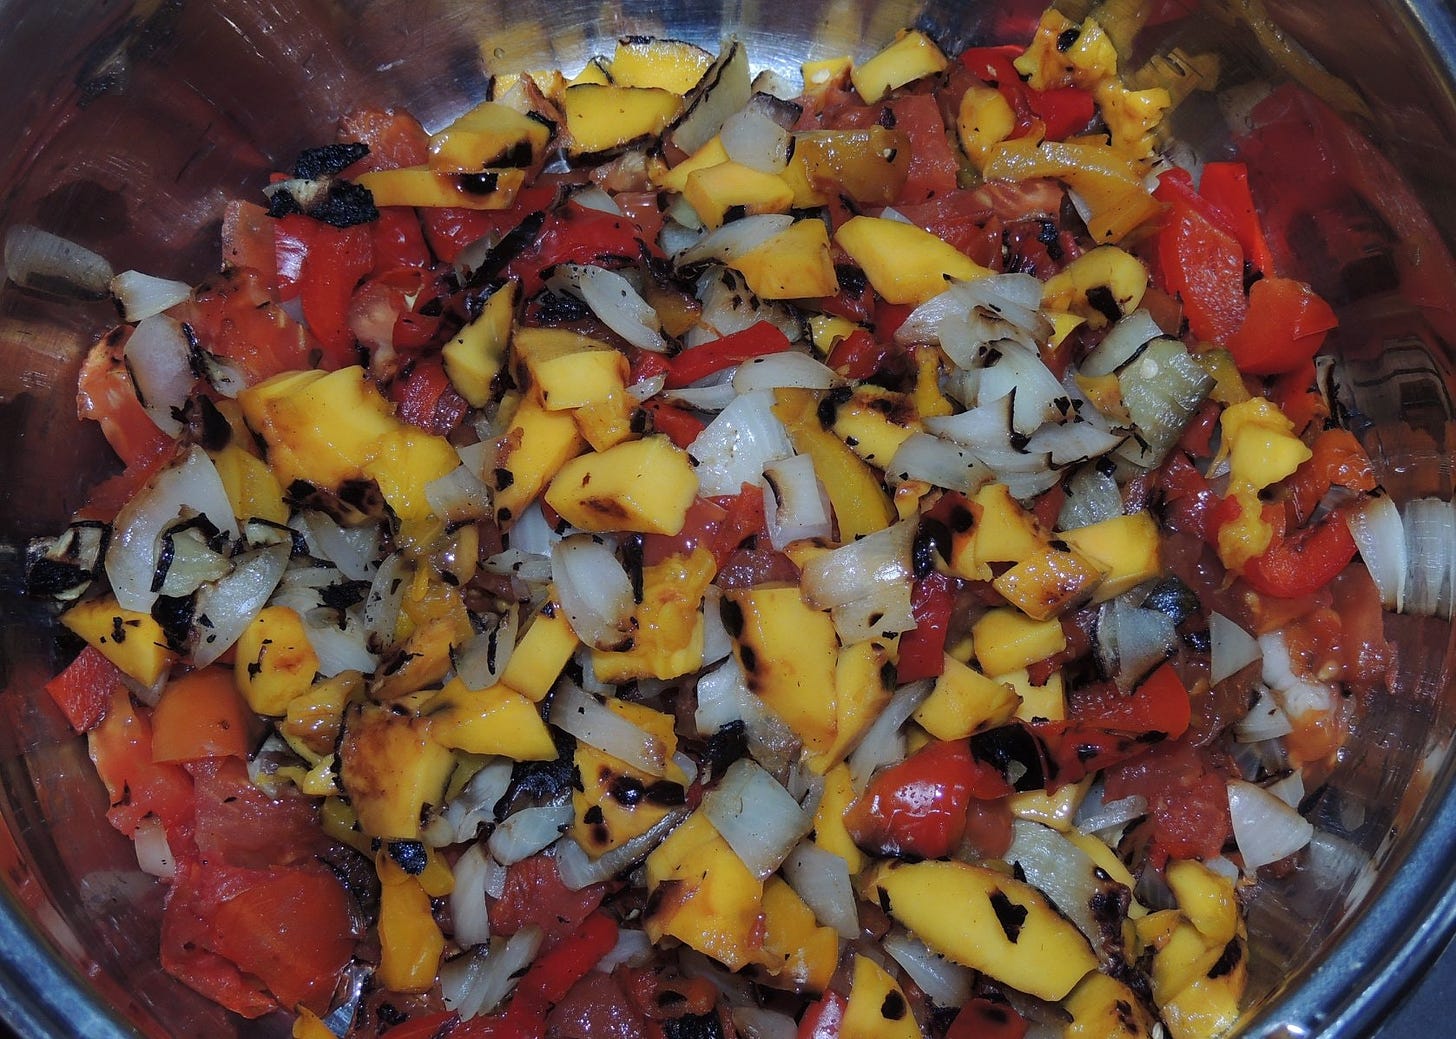 diced up roasted ingredients ready to be covered in vinegar/water mixture and simmered to perfection before blending